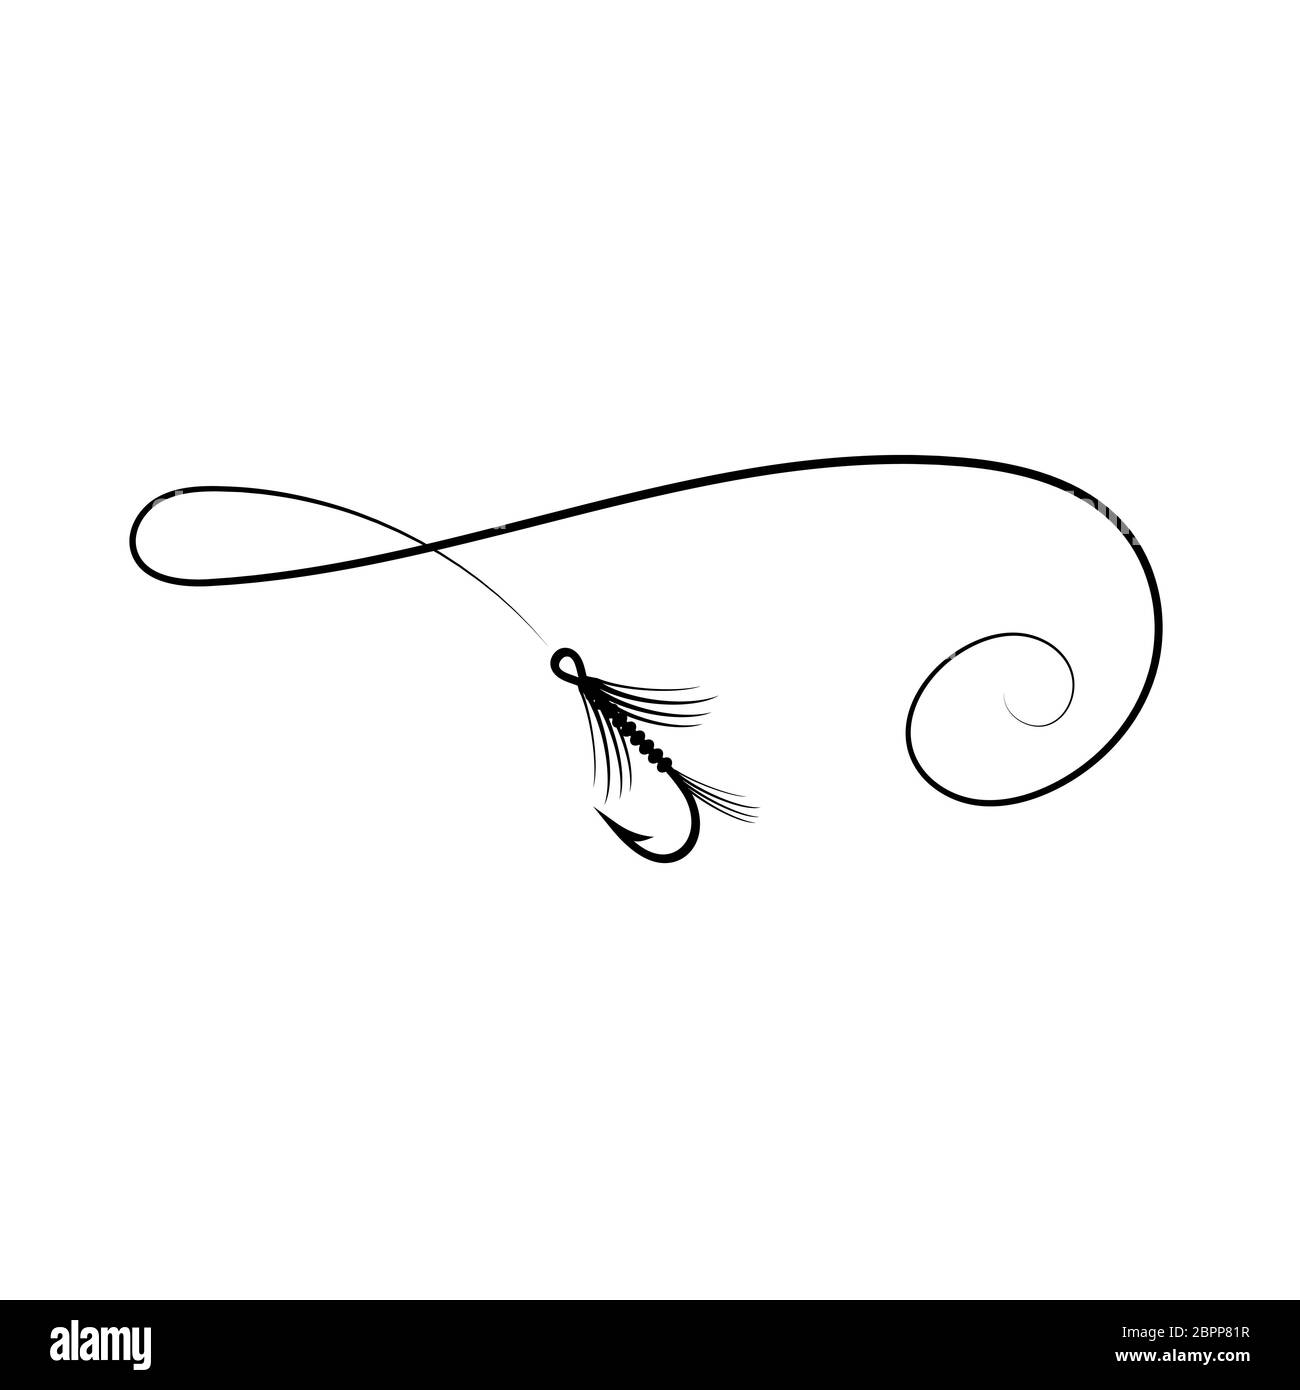 Fish Hook Hanging From A Piece Of Fishing Line - Isolated On White